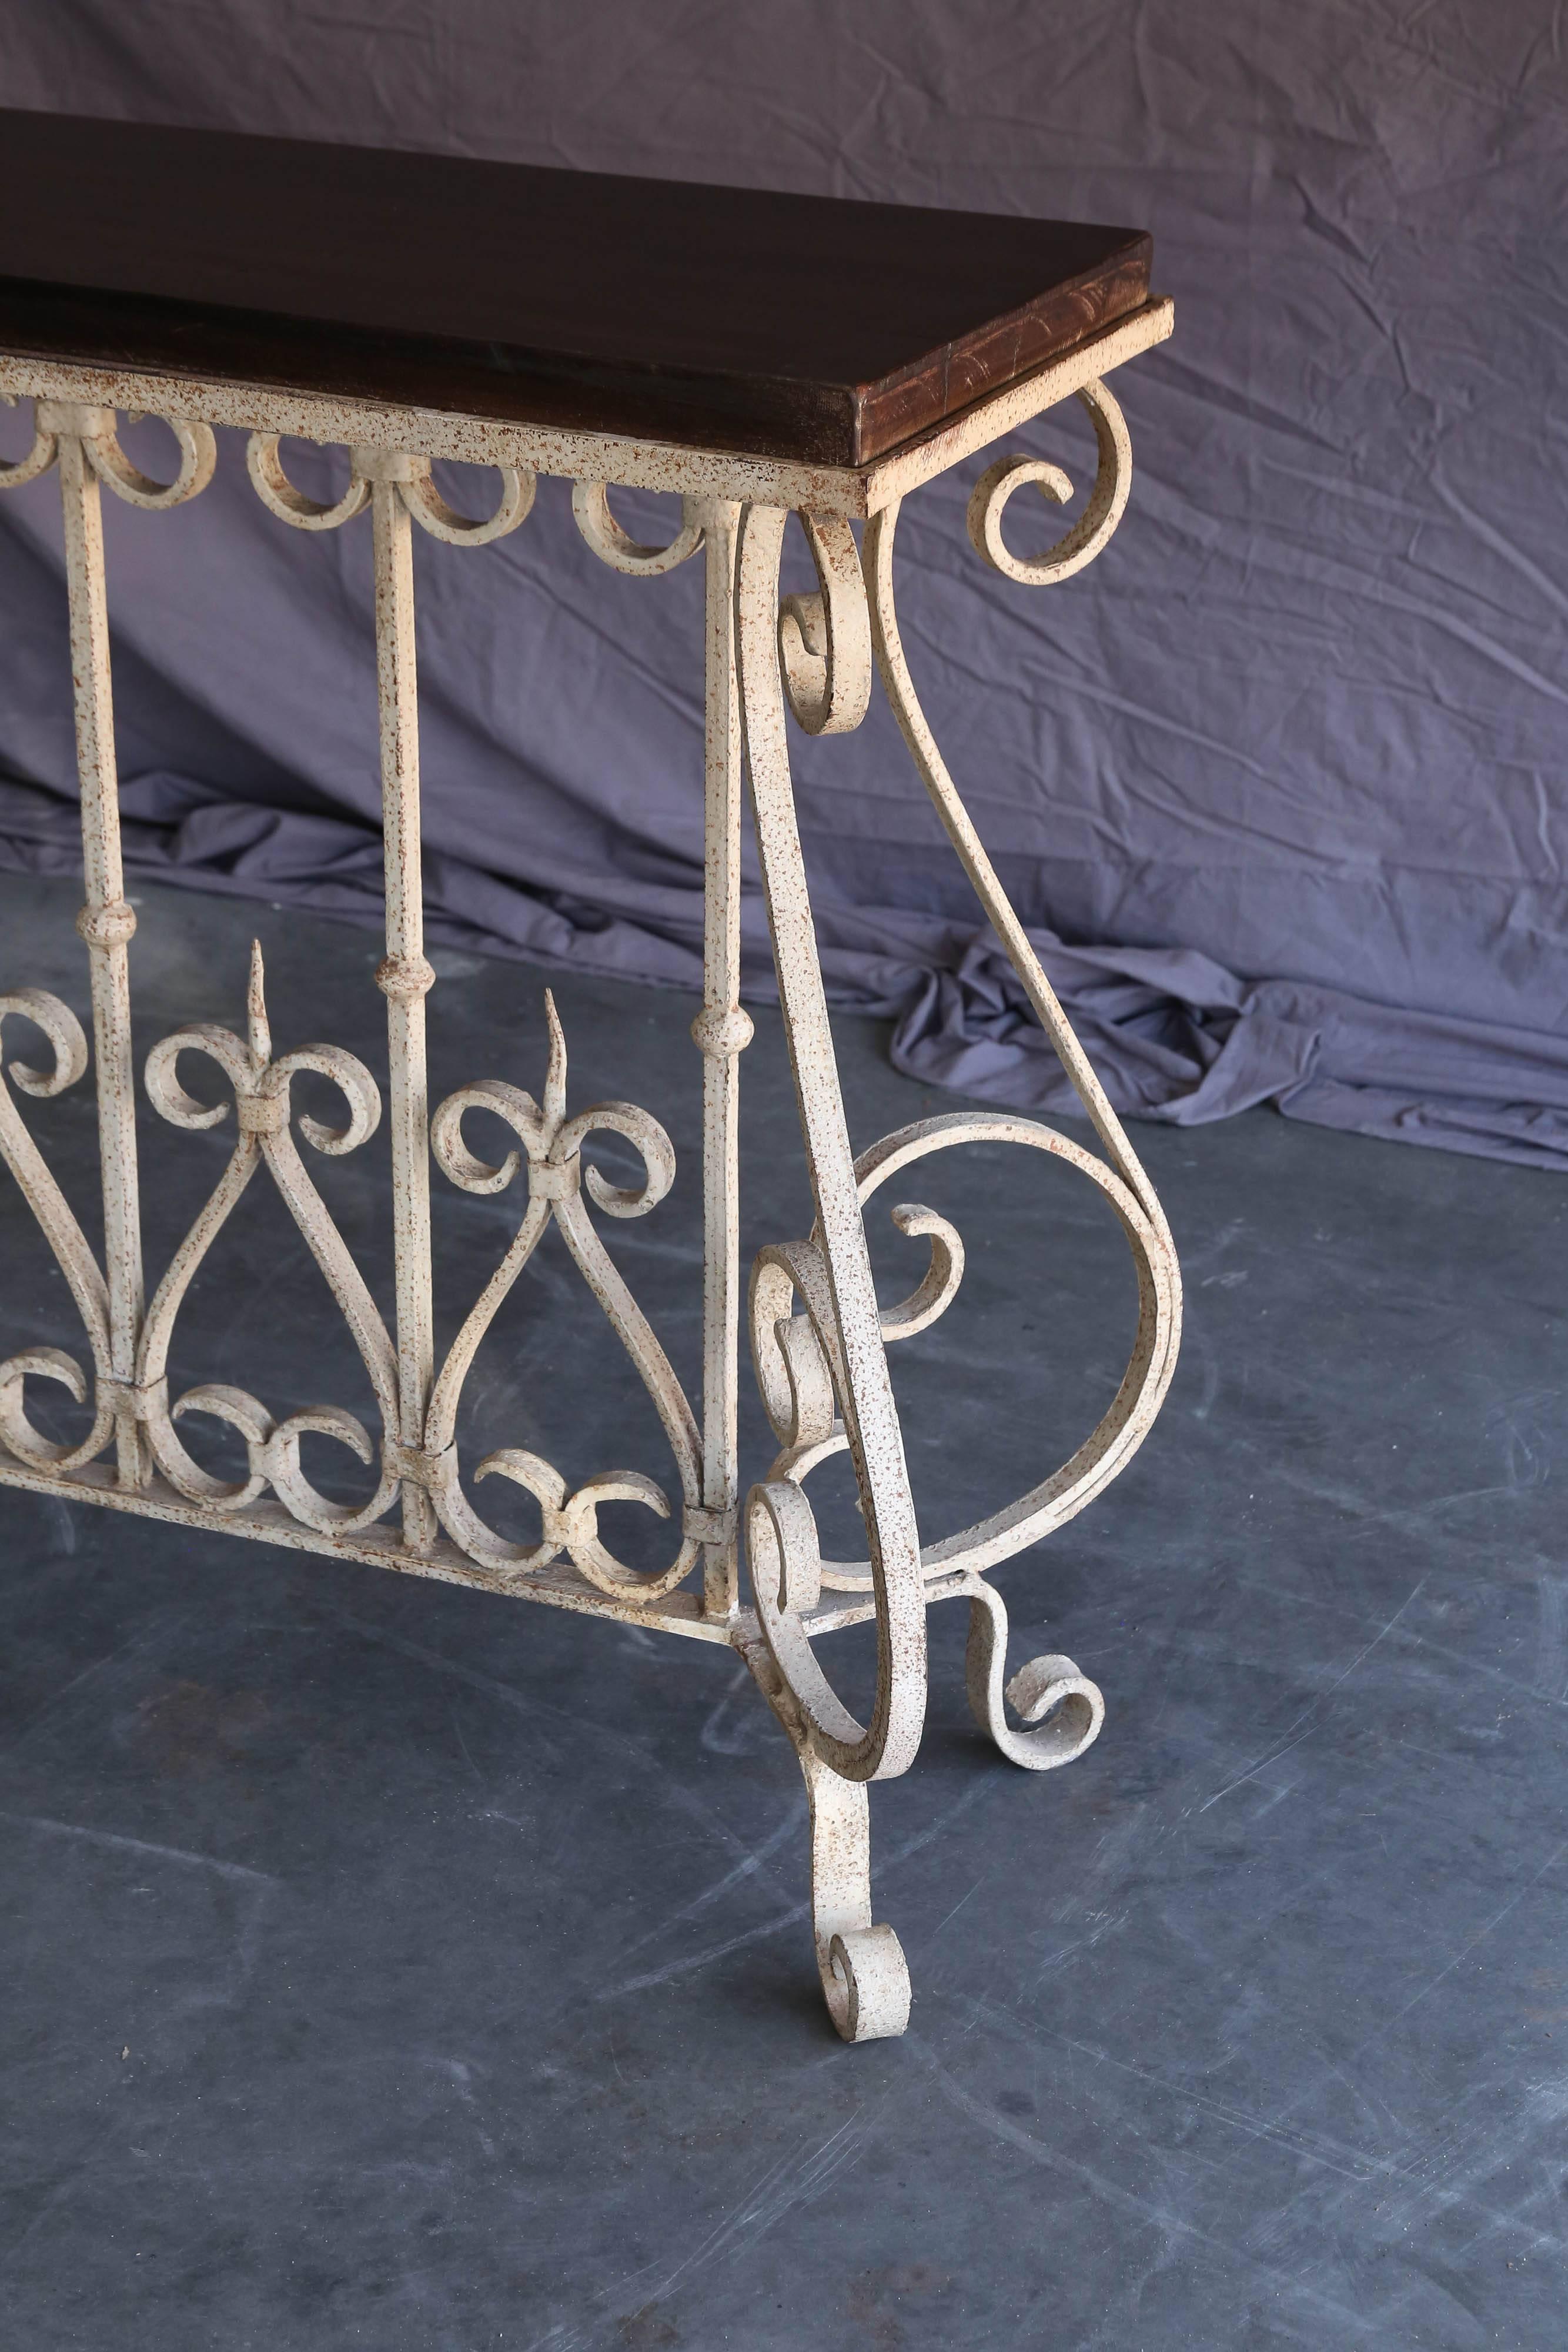 An early 20th century French colonial handcrafted console table from a settler's home in India.
The top is made of solid teakwood and the support is hand forged wrought iron. The design of the ironwork comes from country furniture from France. This